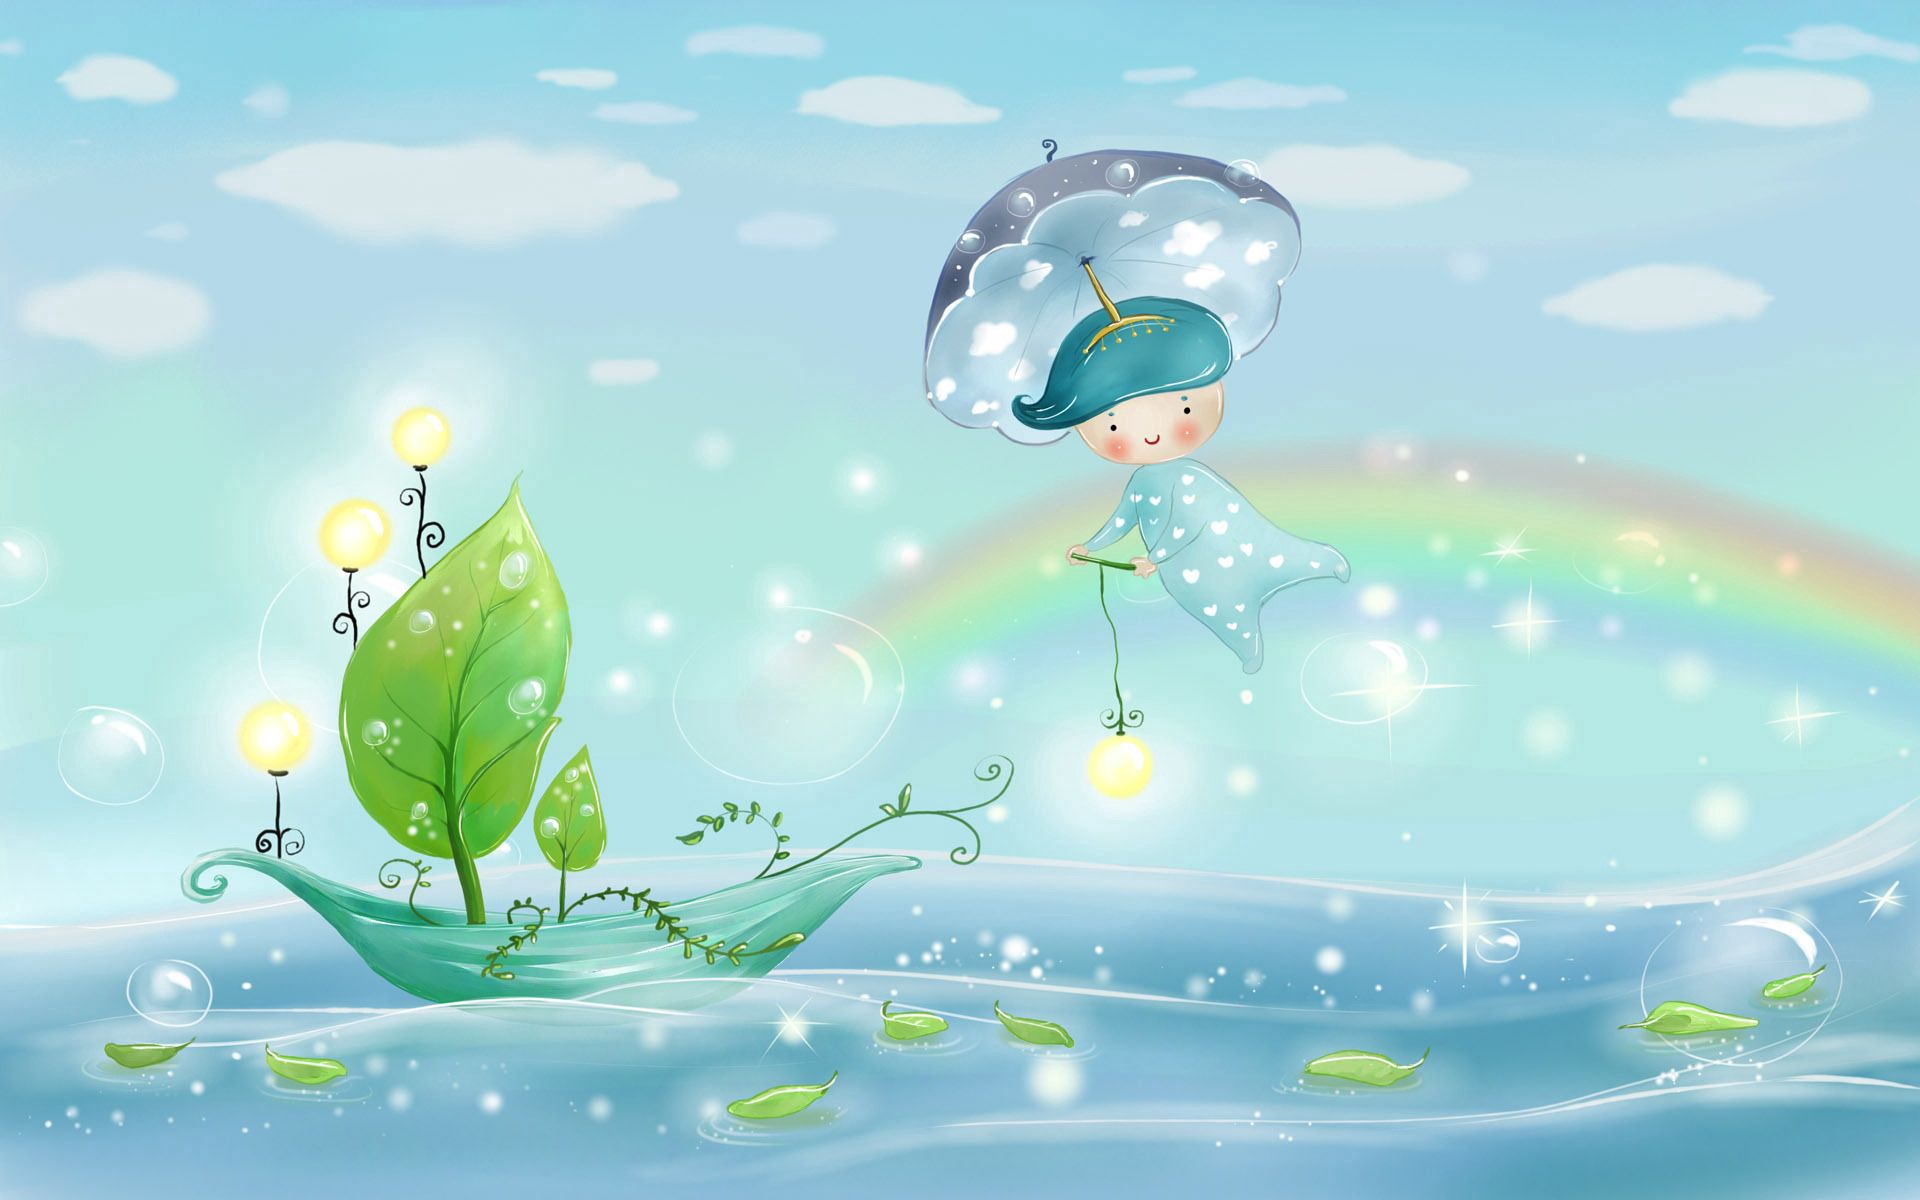 picture, vector, boat, lanterns, nature, water, sky, leaves, rain, sea, bubbles, clouds, rainbow, lights, shine, light, drawing, sail, umbrella, boy, weather wallpaper for mobile